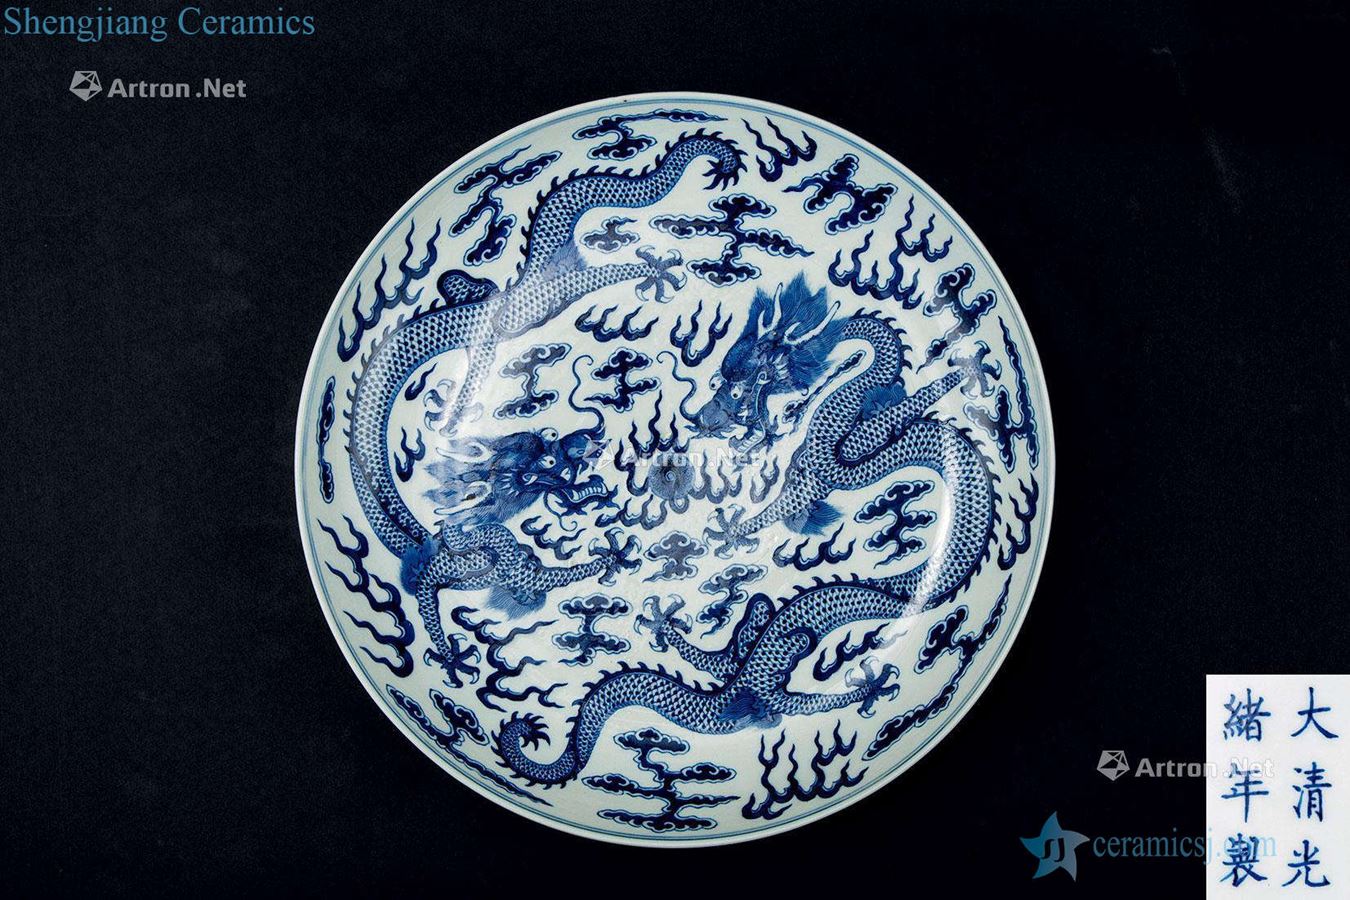 In the qing dynasty (1644-1911) blue and white praised tray